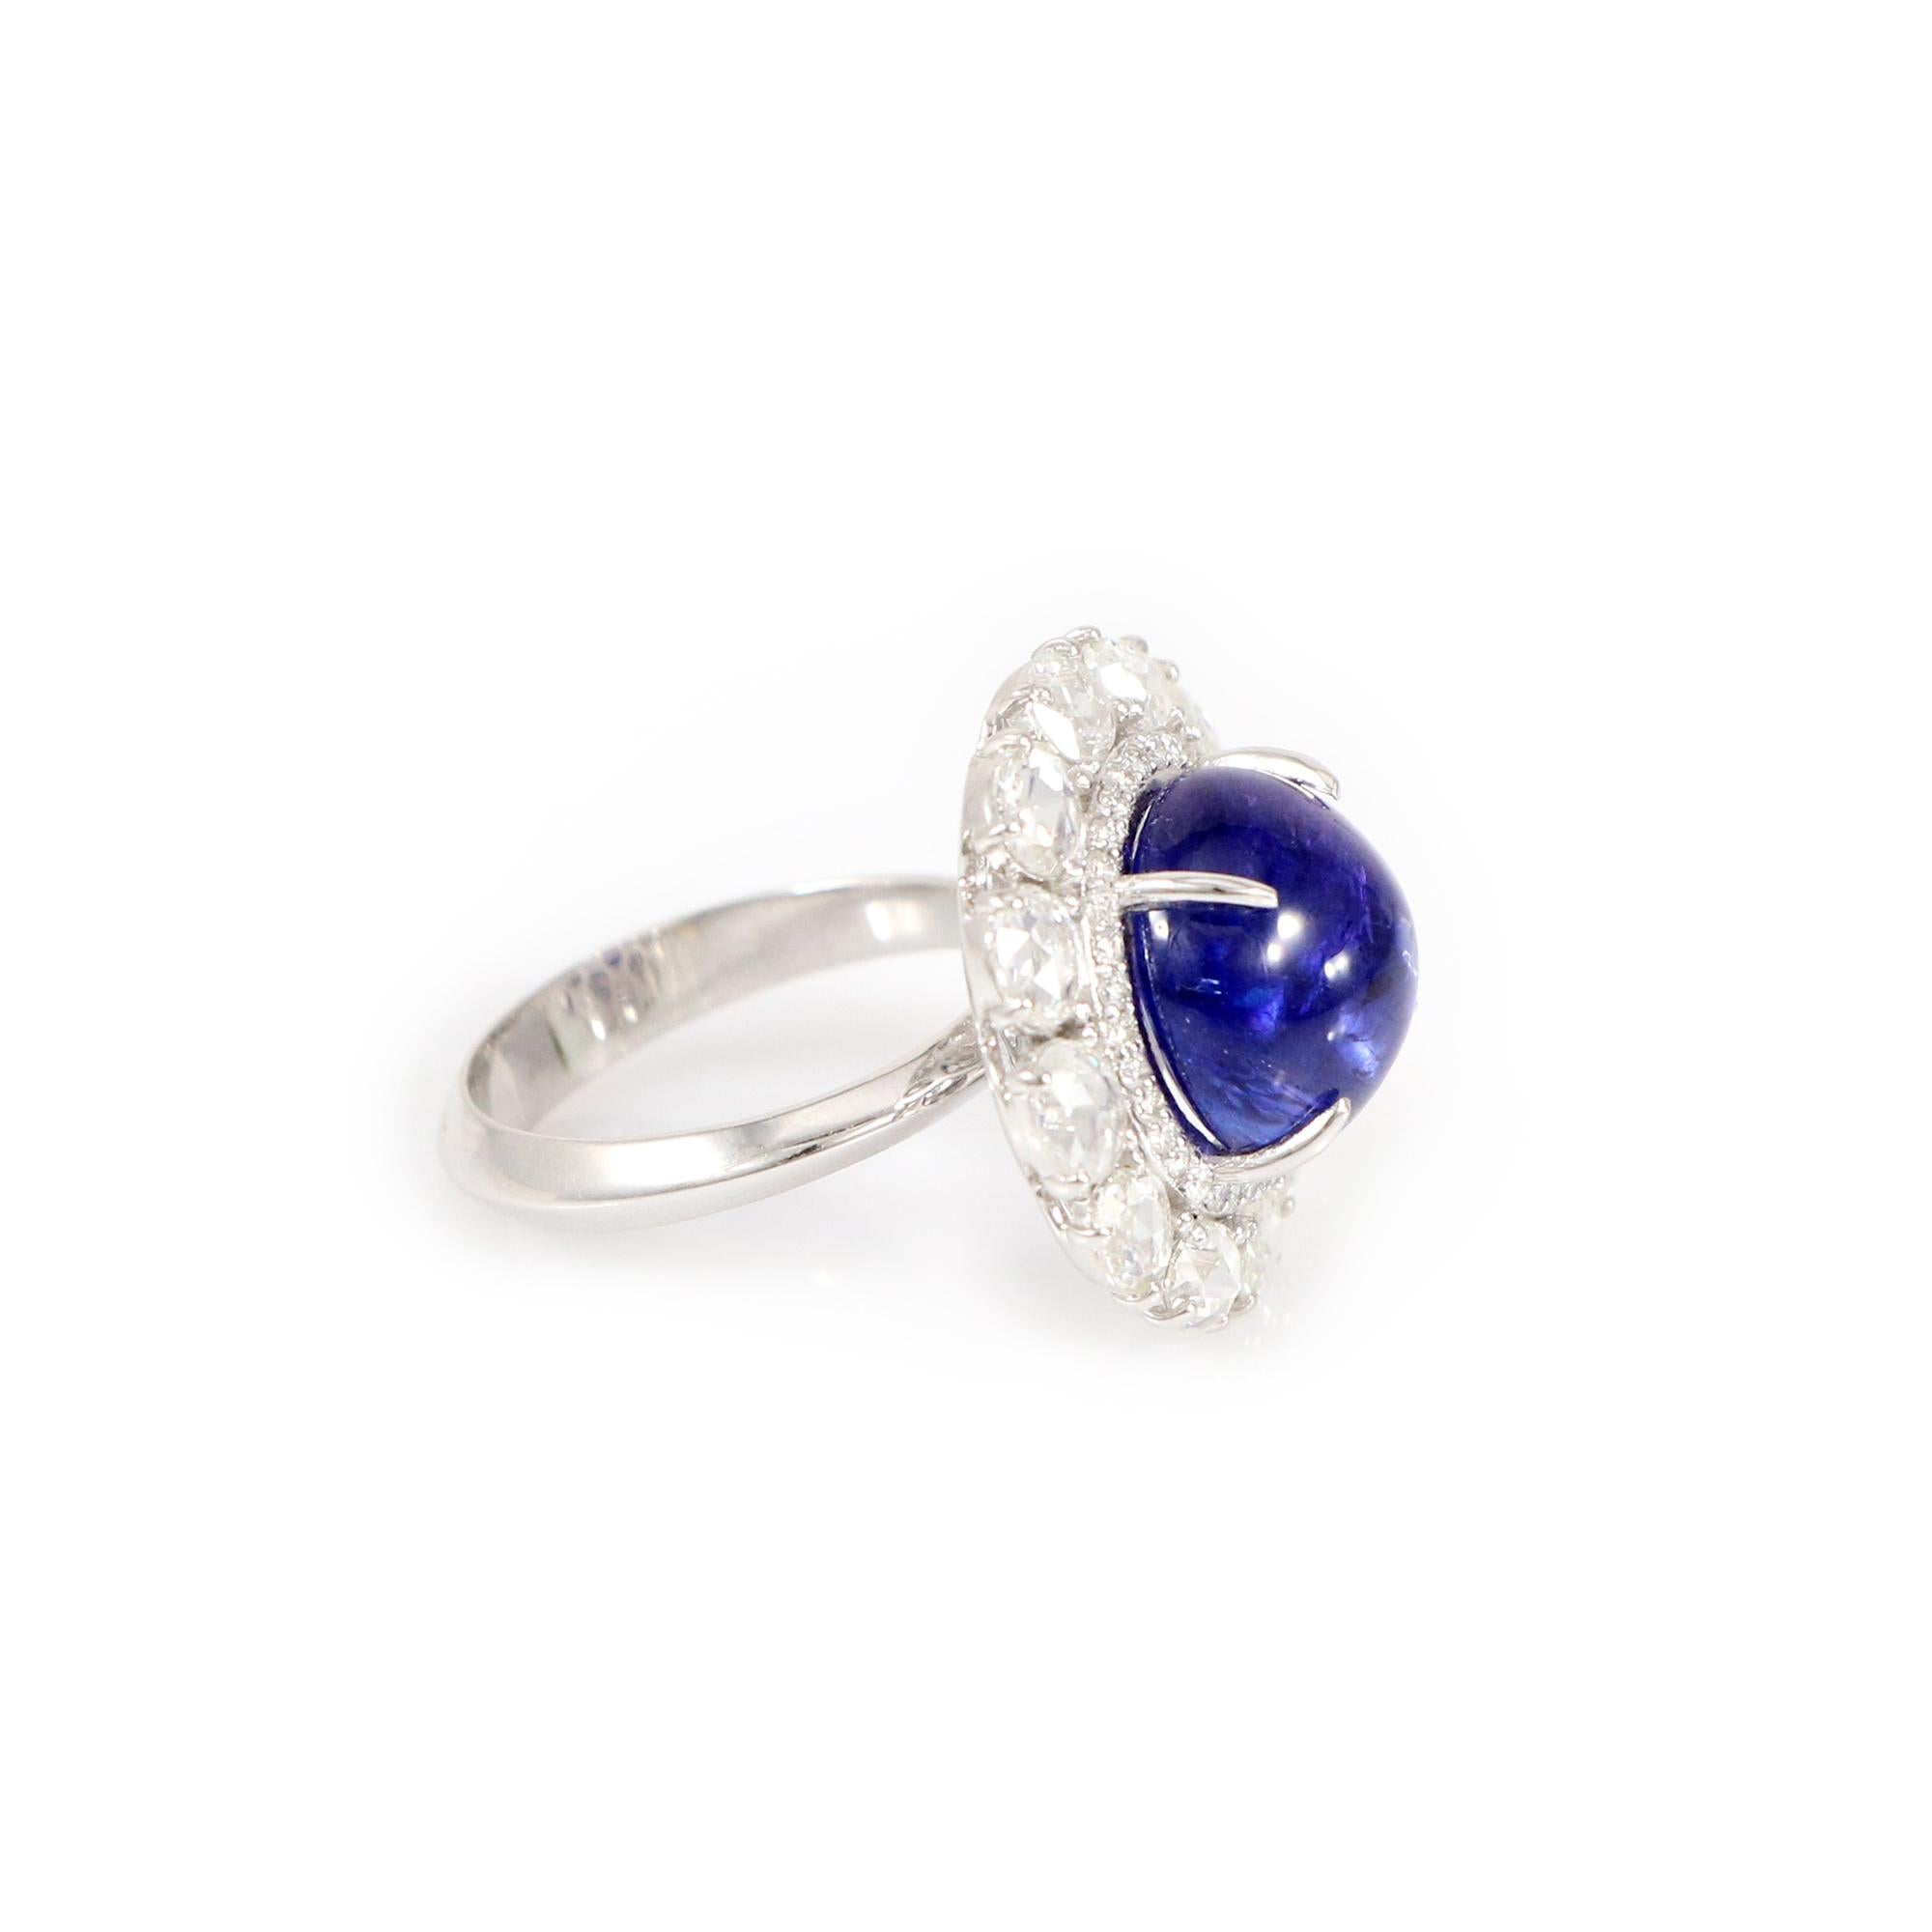 Introducing our exquisite white gold ring adorned with the rare and captivating Tanzanite, framed by shimmering oval-shaped rose-cut diamonds. These distinctive oval diamonds accentuate the Tanzanite's exceptional beauty, creating a mesmerizing